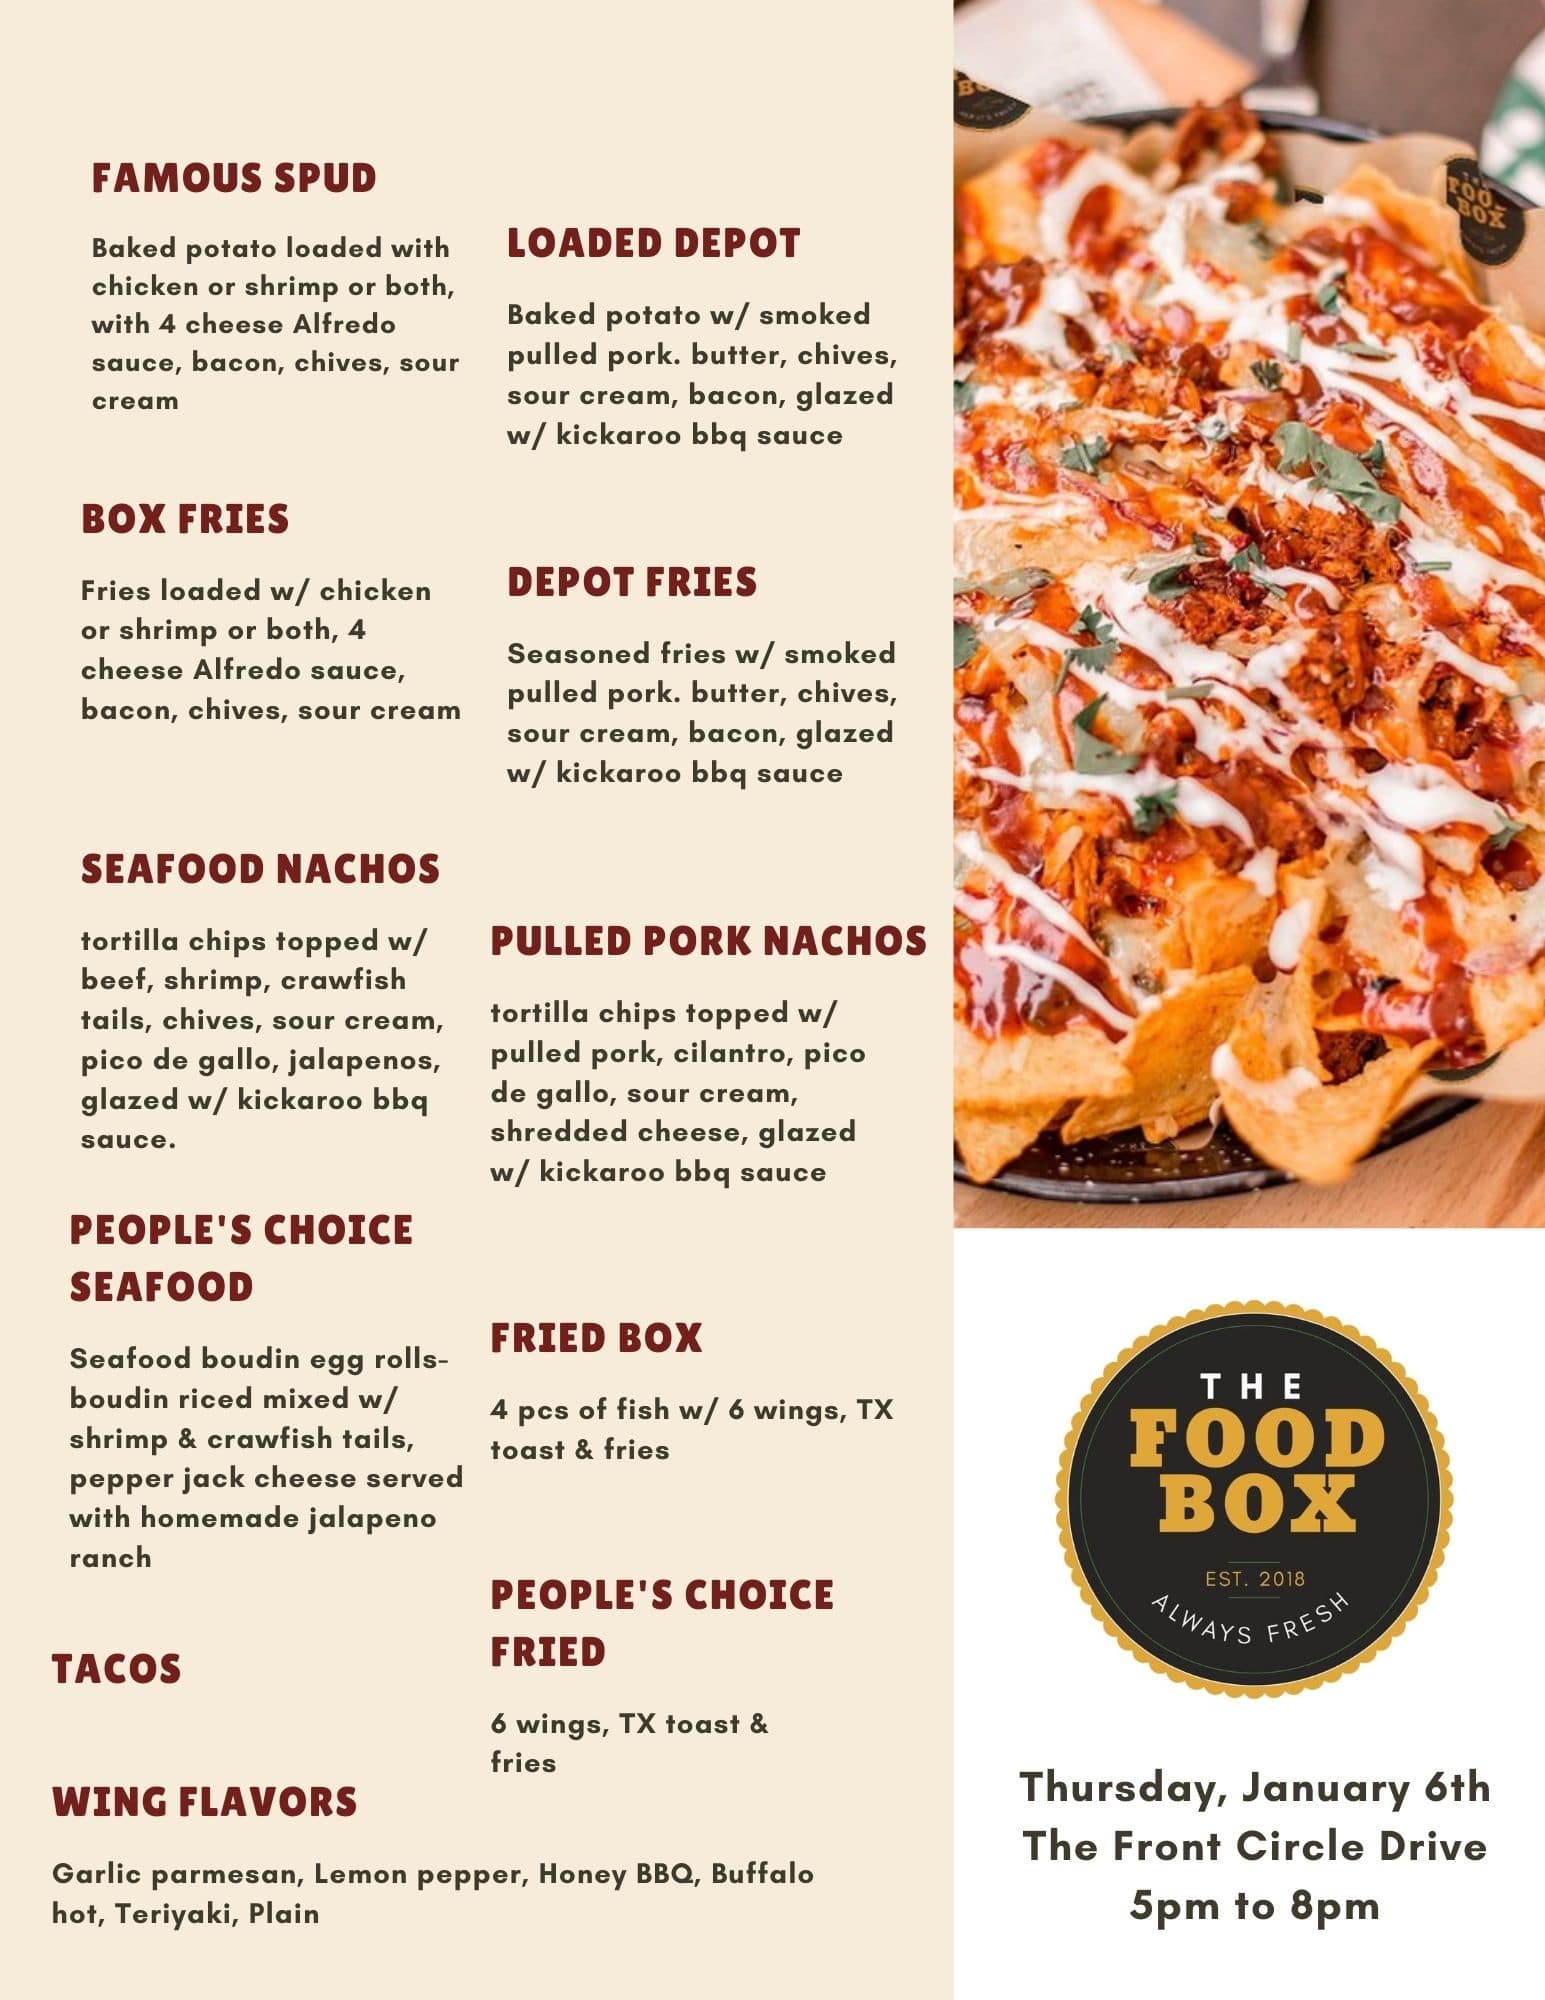 The Apartments in The Woodlands TX food box menu flyer.